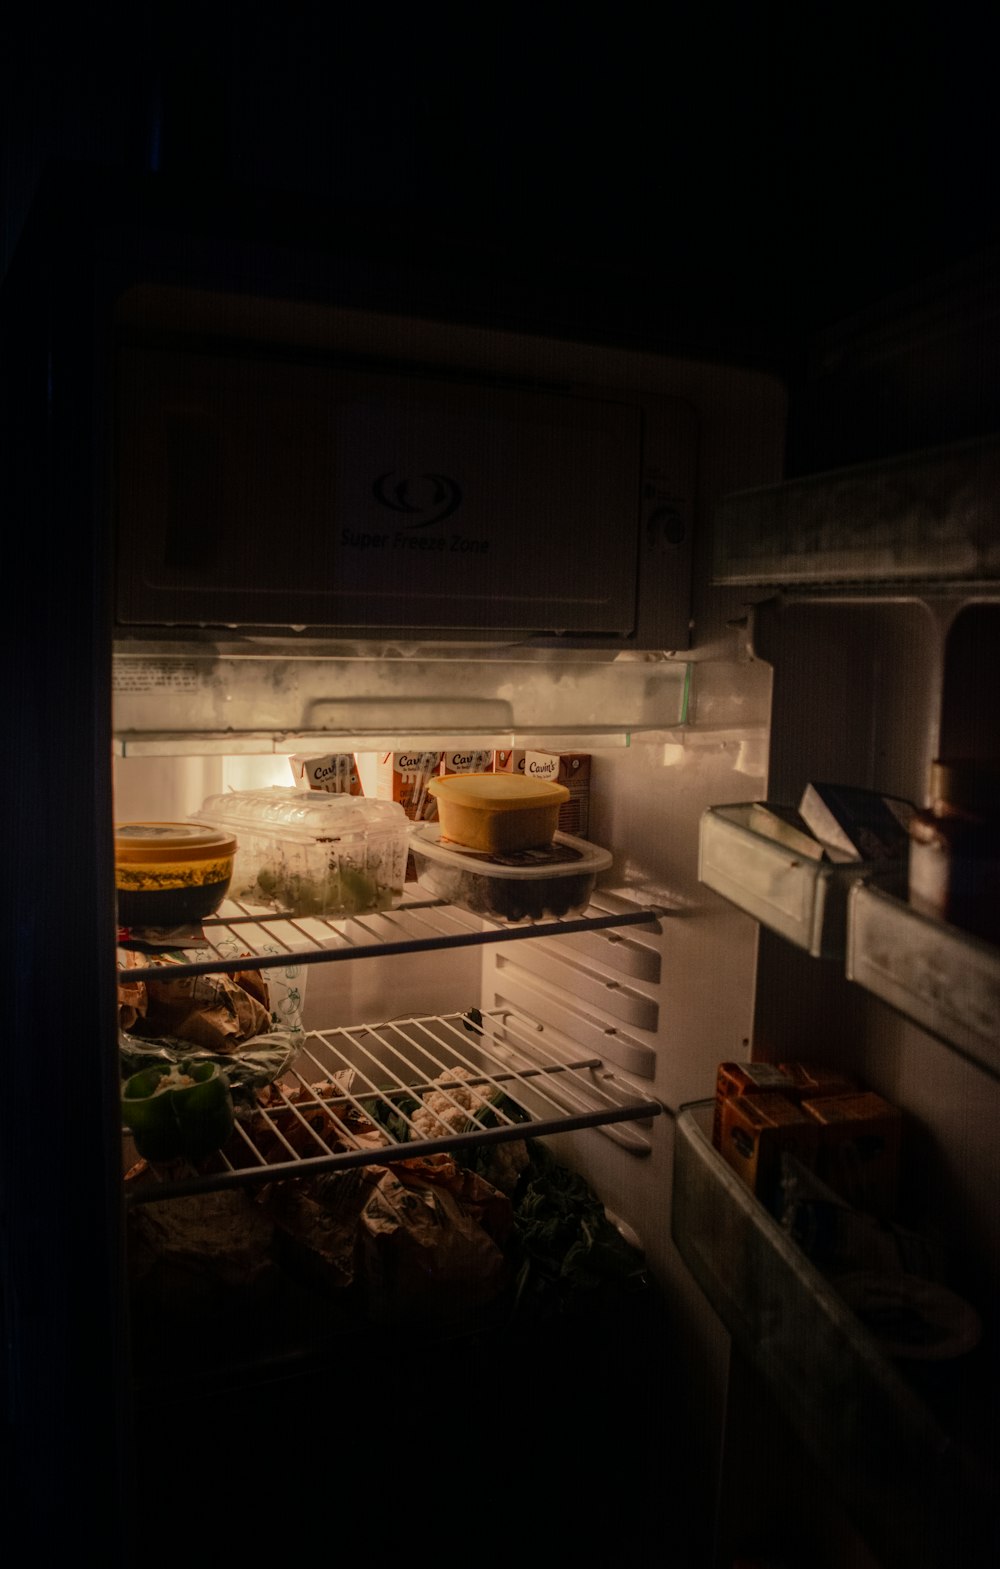 white refrigerator with food inside